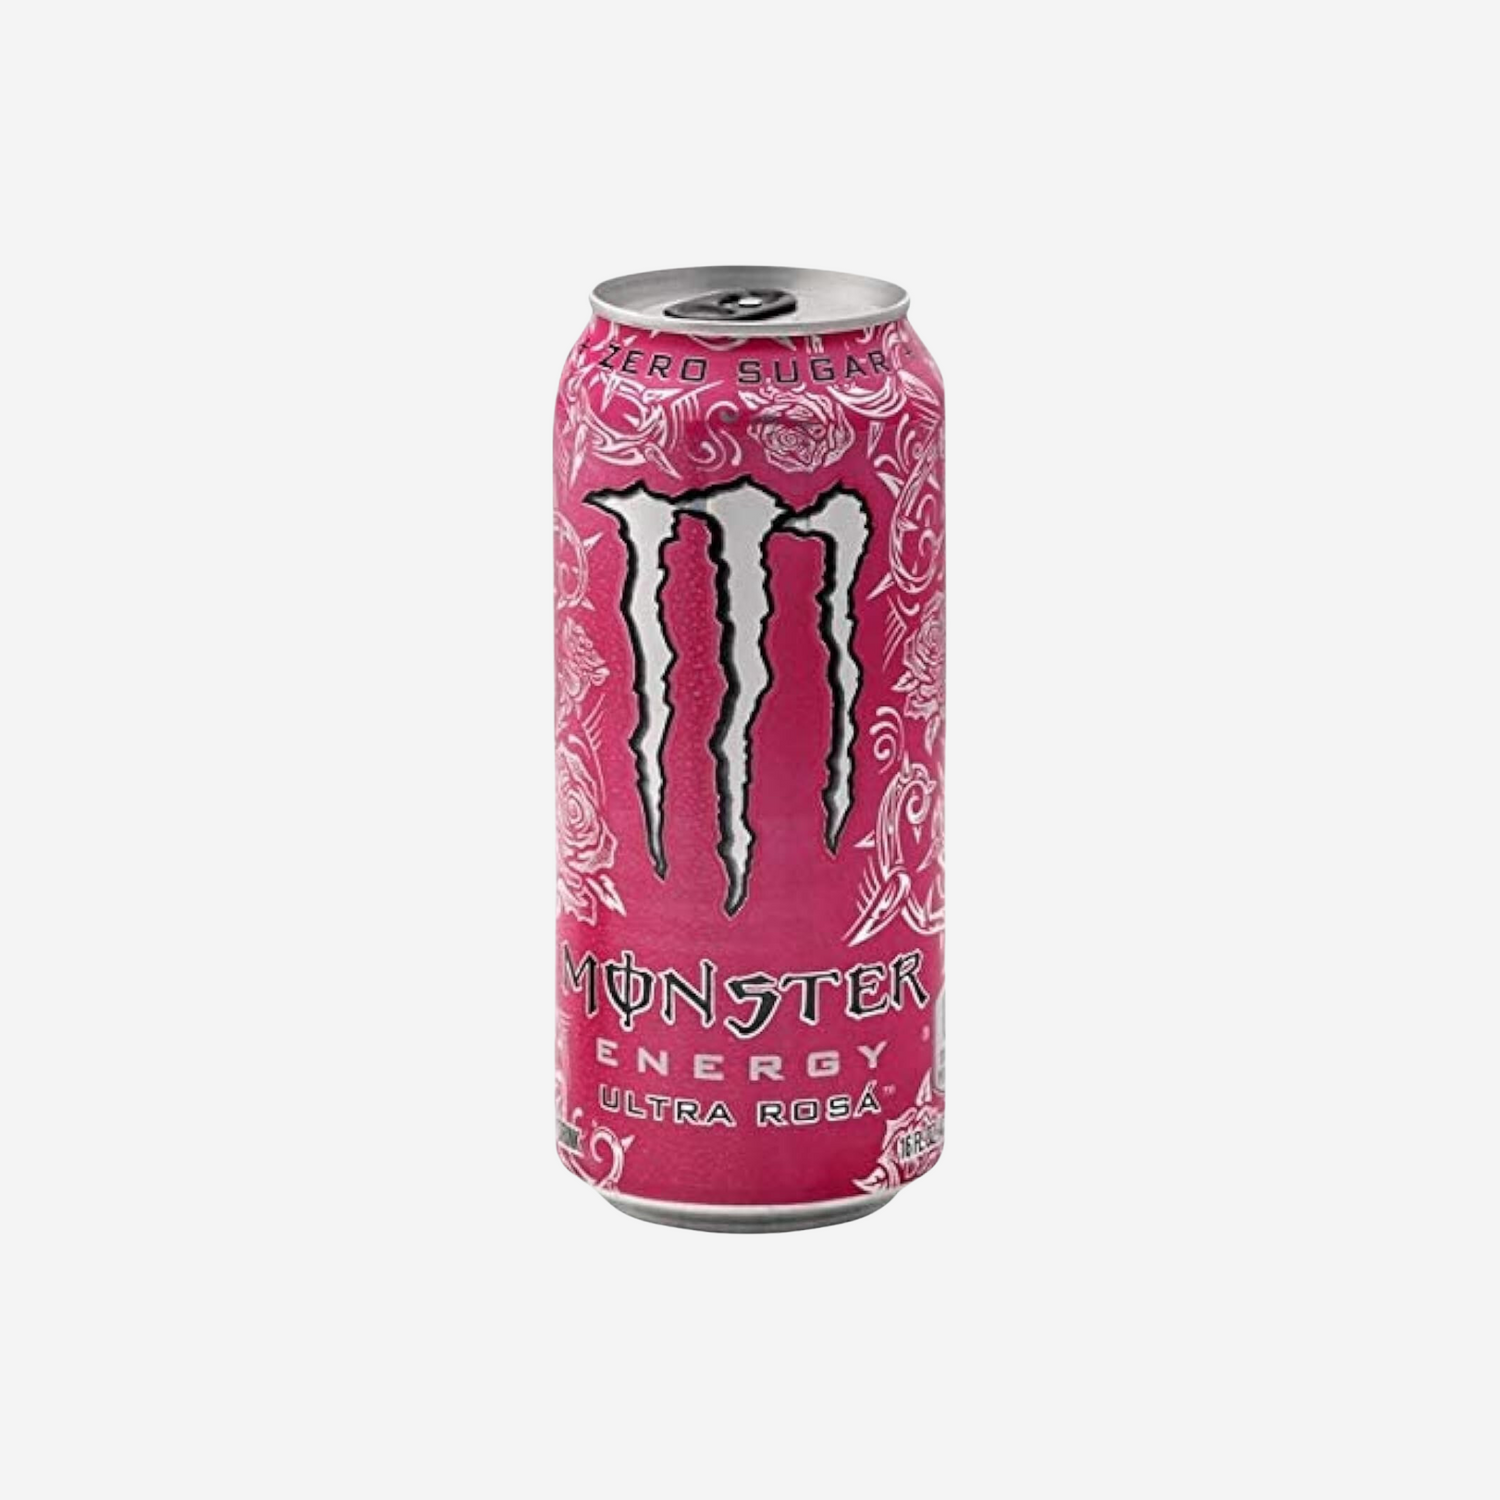 Monster Energy Drink Ultra Rosa 16 Oz Can (Pack of 12)